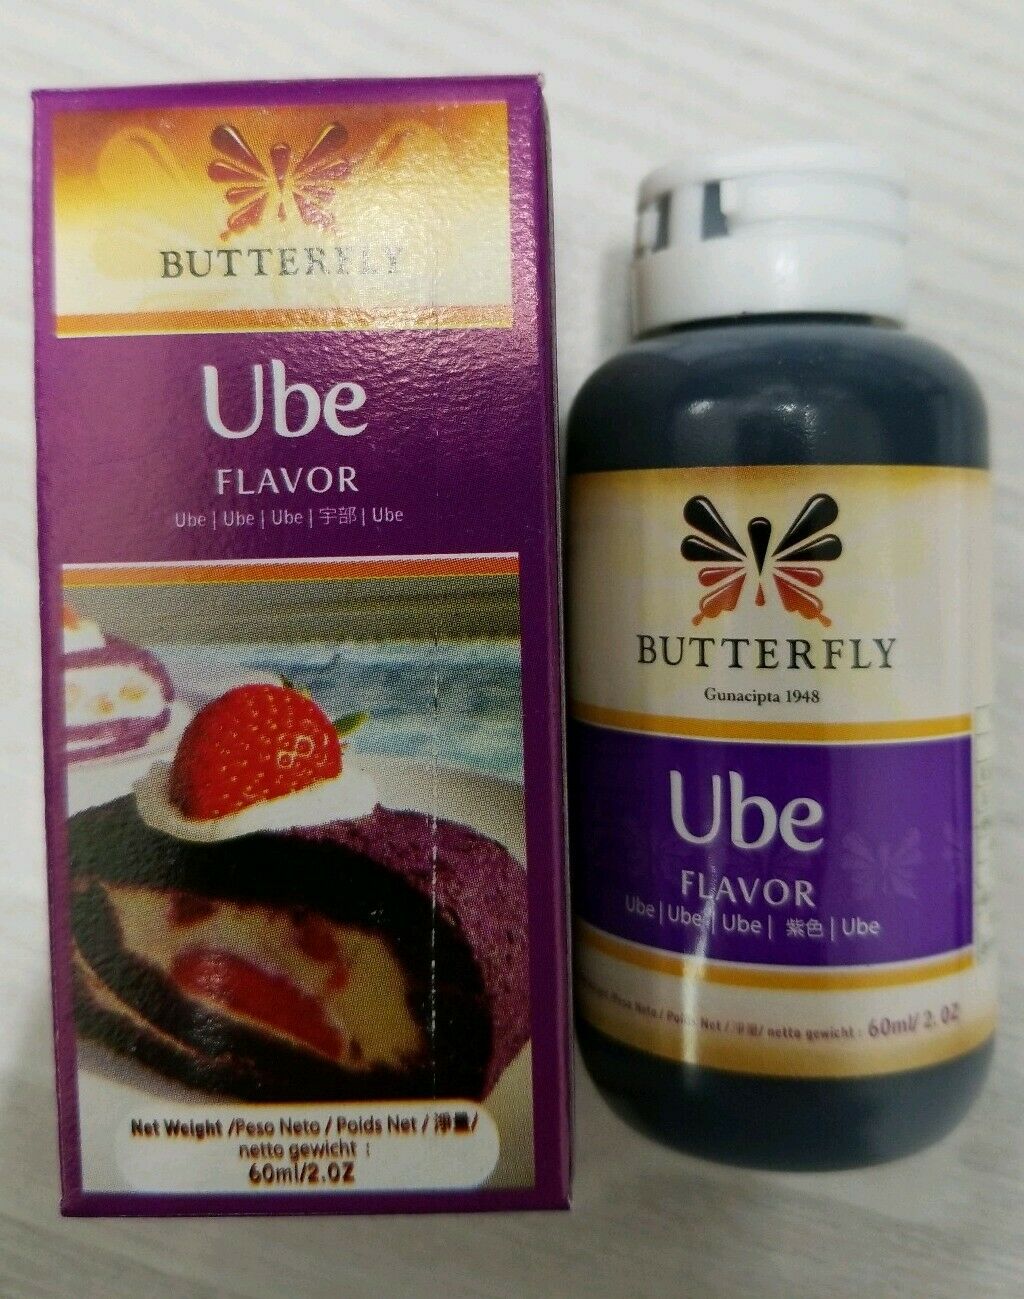 Butterfly Ube Purple Yam Flavoring Paste Extract (60ml = 2 Oz) Med Size Bottle